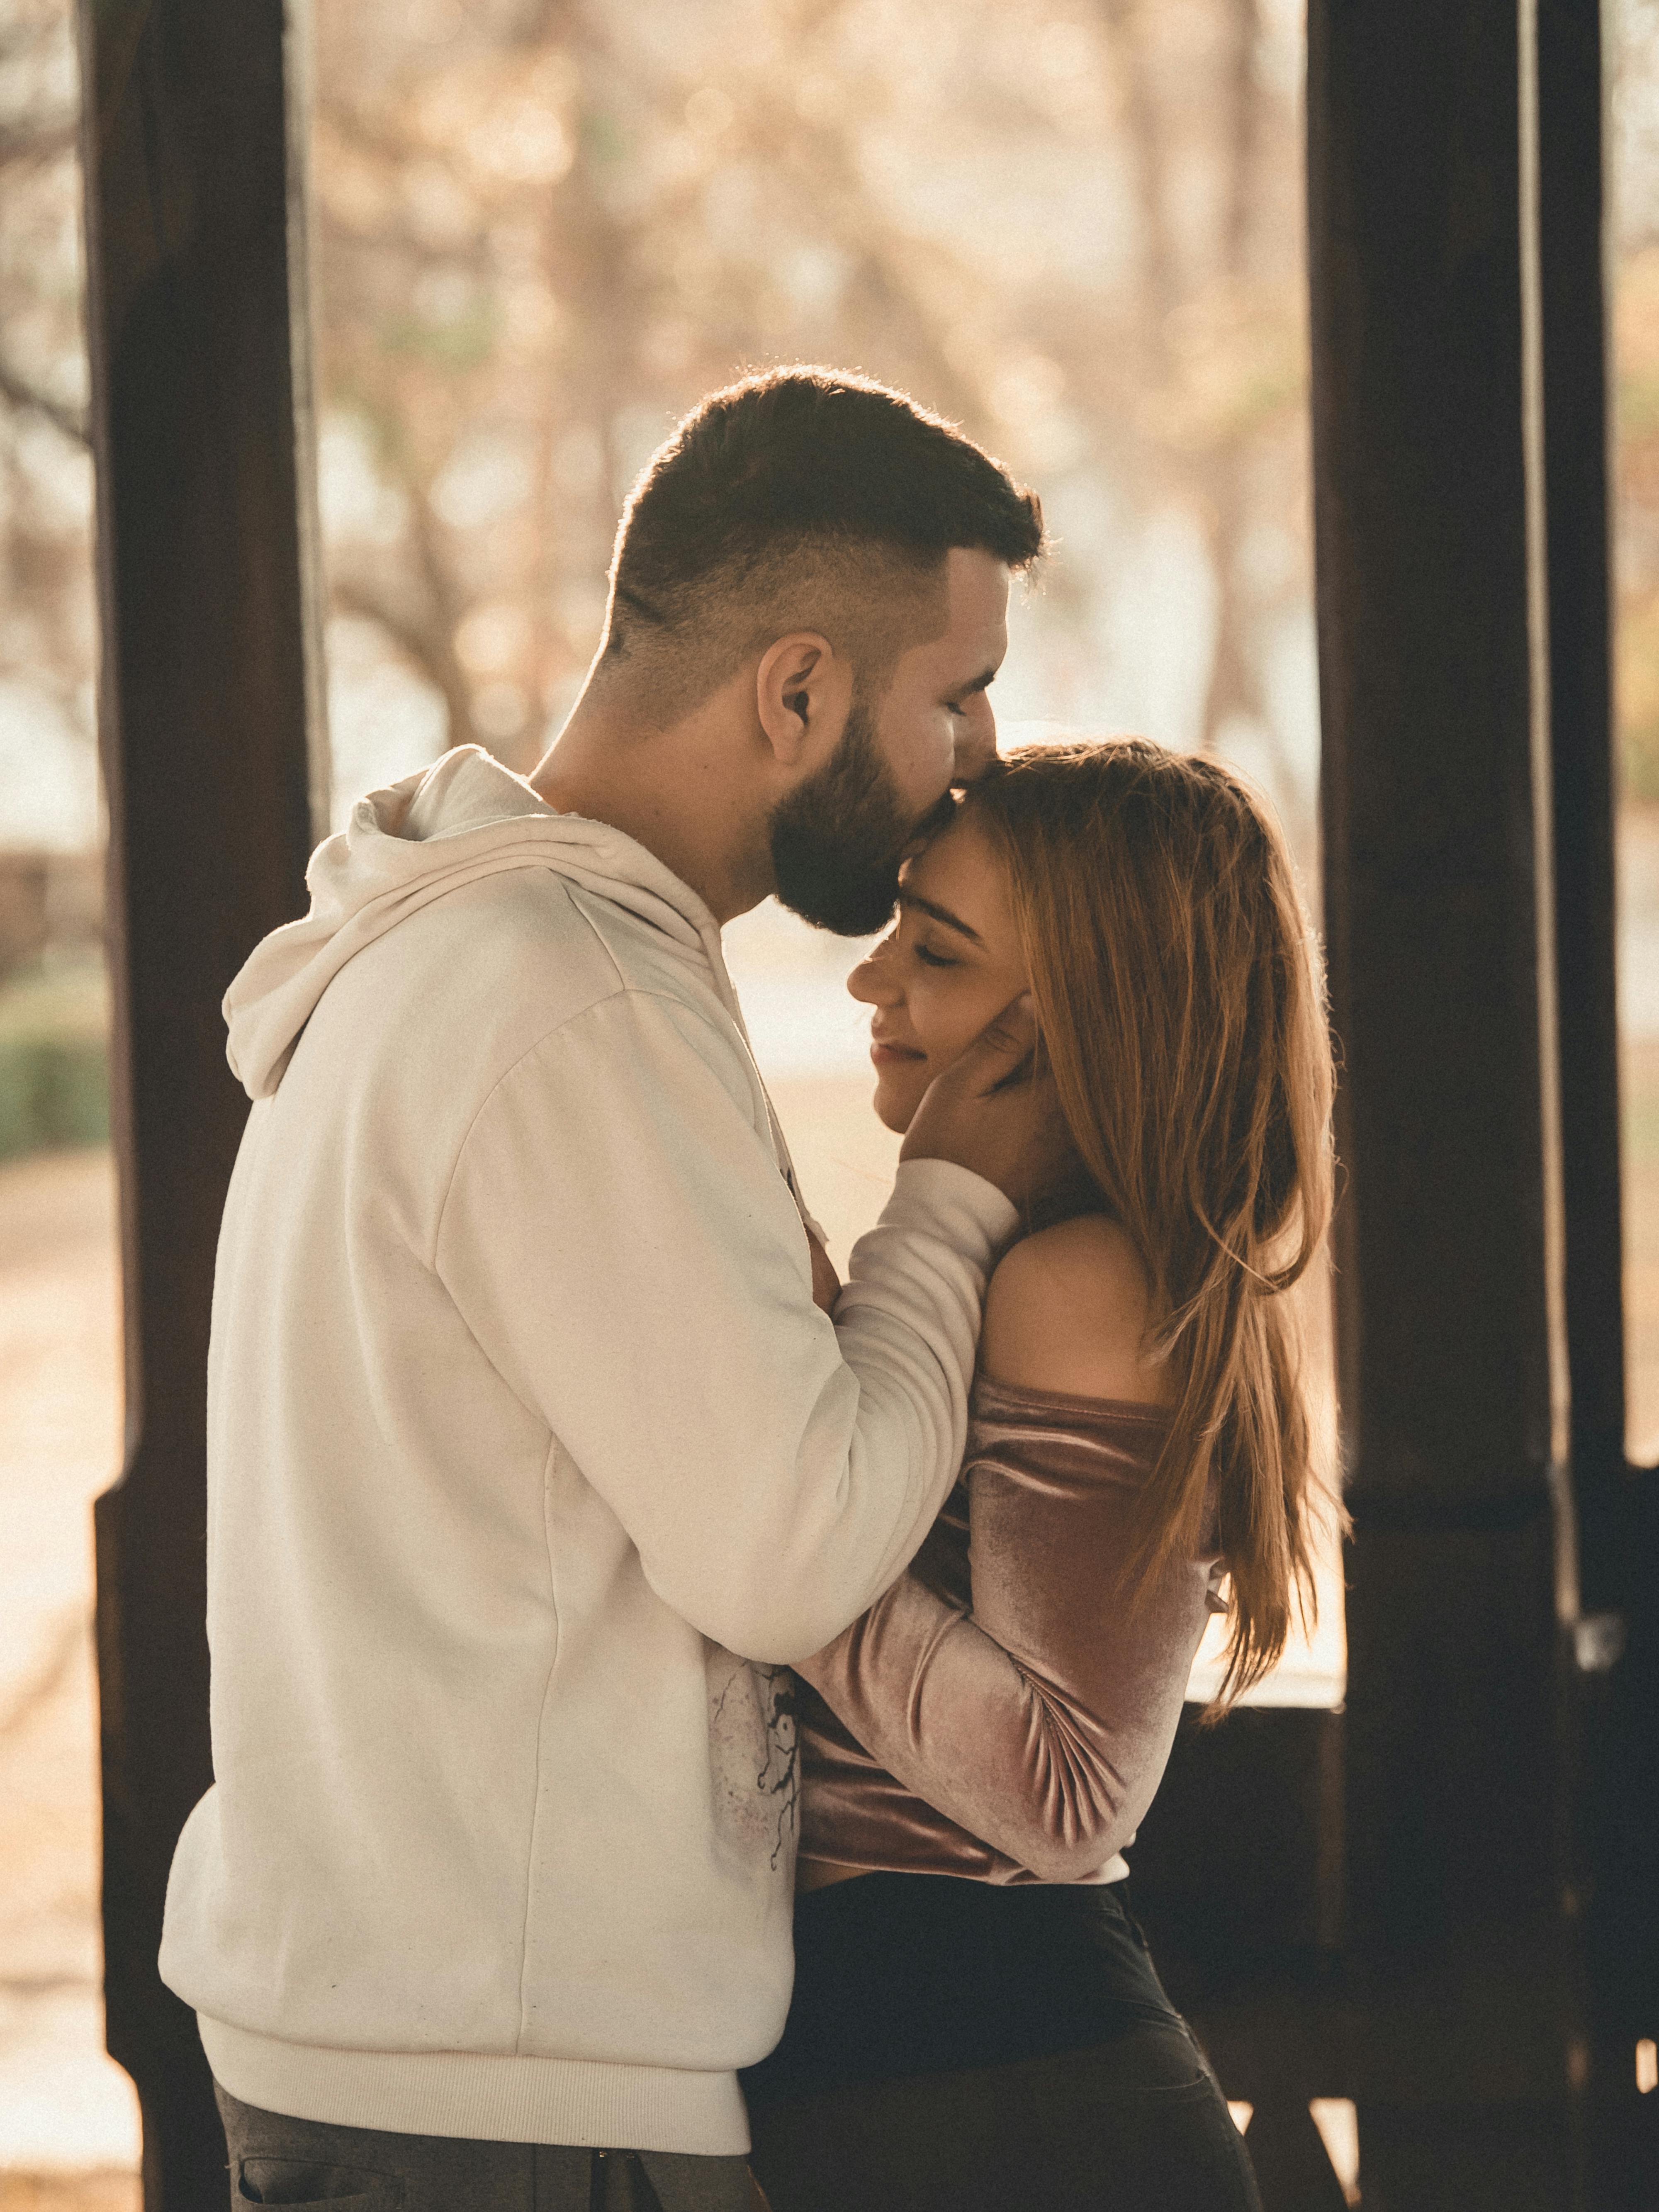 Love - couple kissing | Couple photography poses, Love photos, Photography